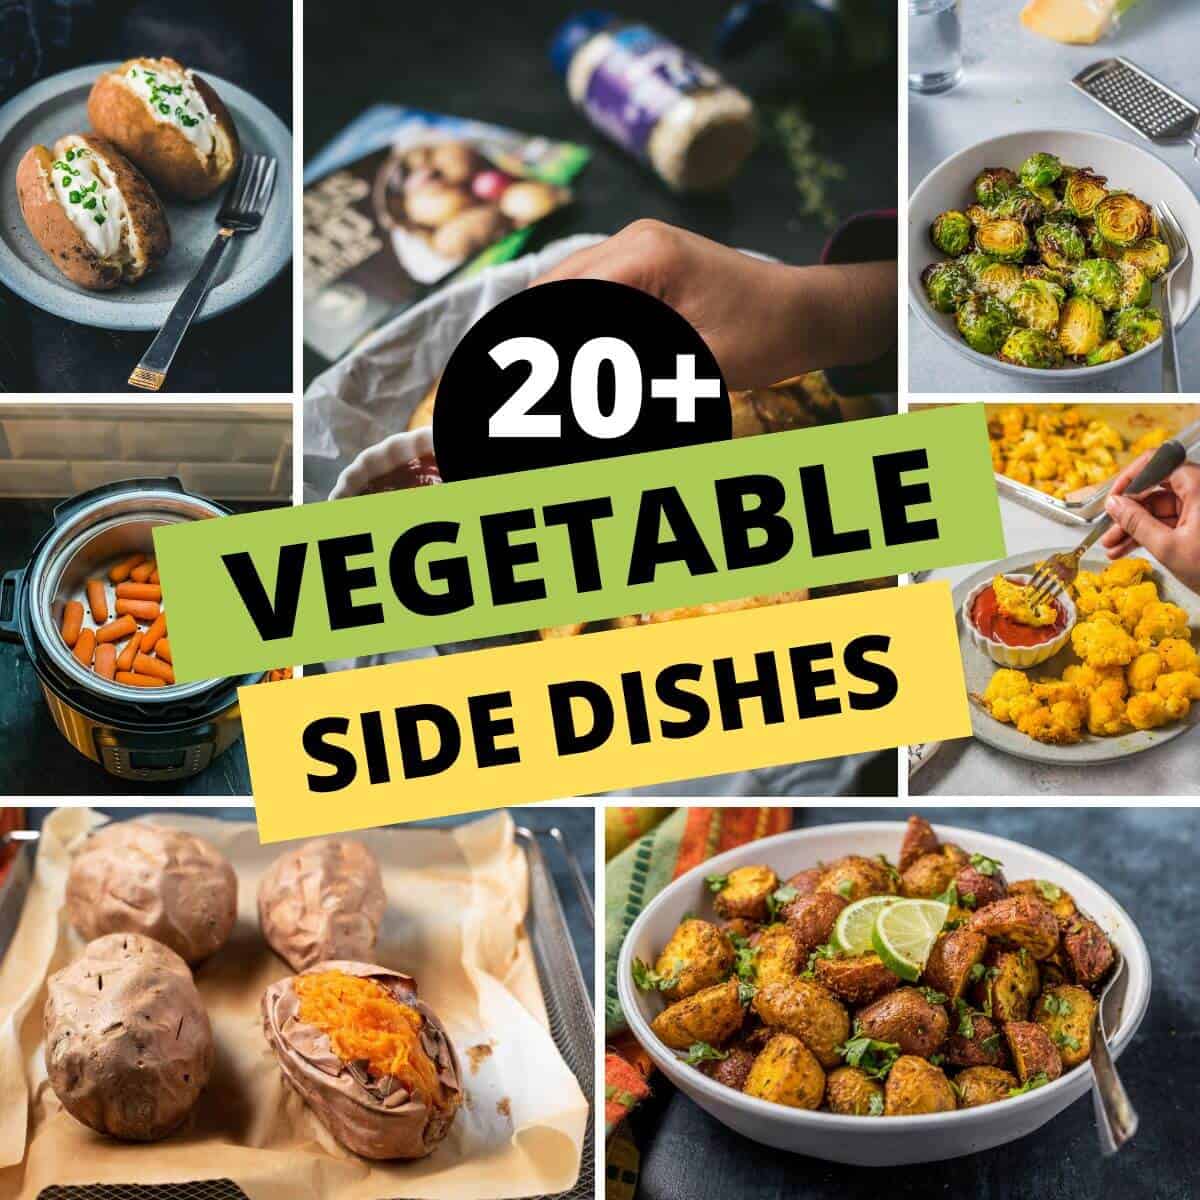 A collage of images with caption 20+ vegetable side dishes